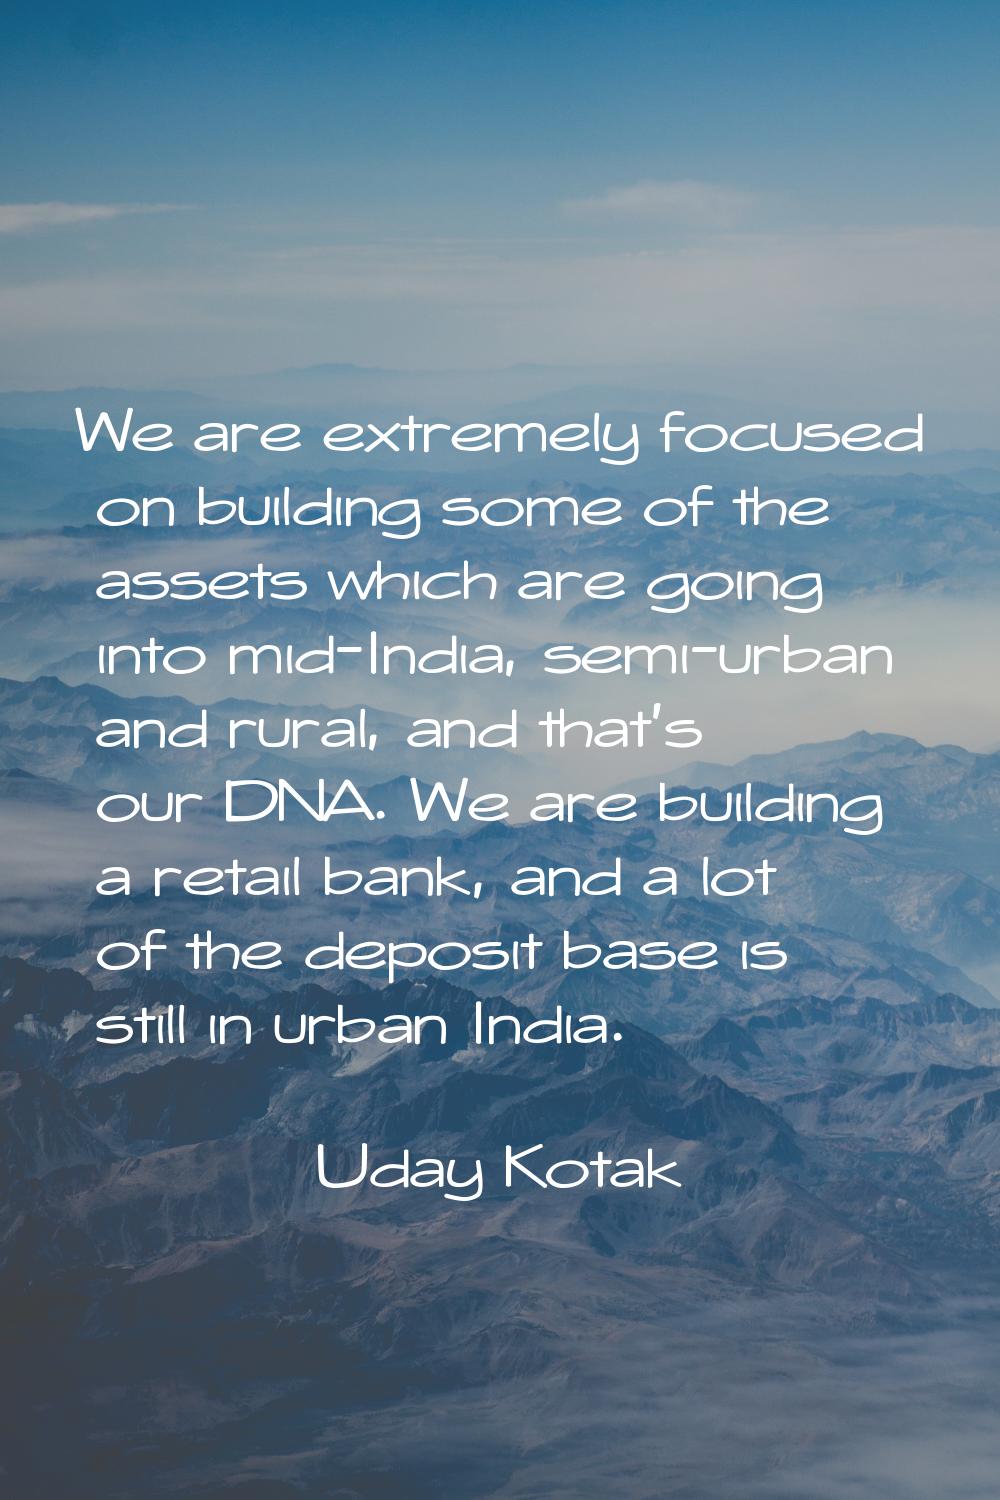 We are extremely focused on building some of the assets which are going into mid-India, semi-urban 